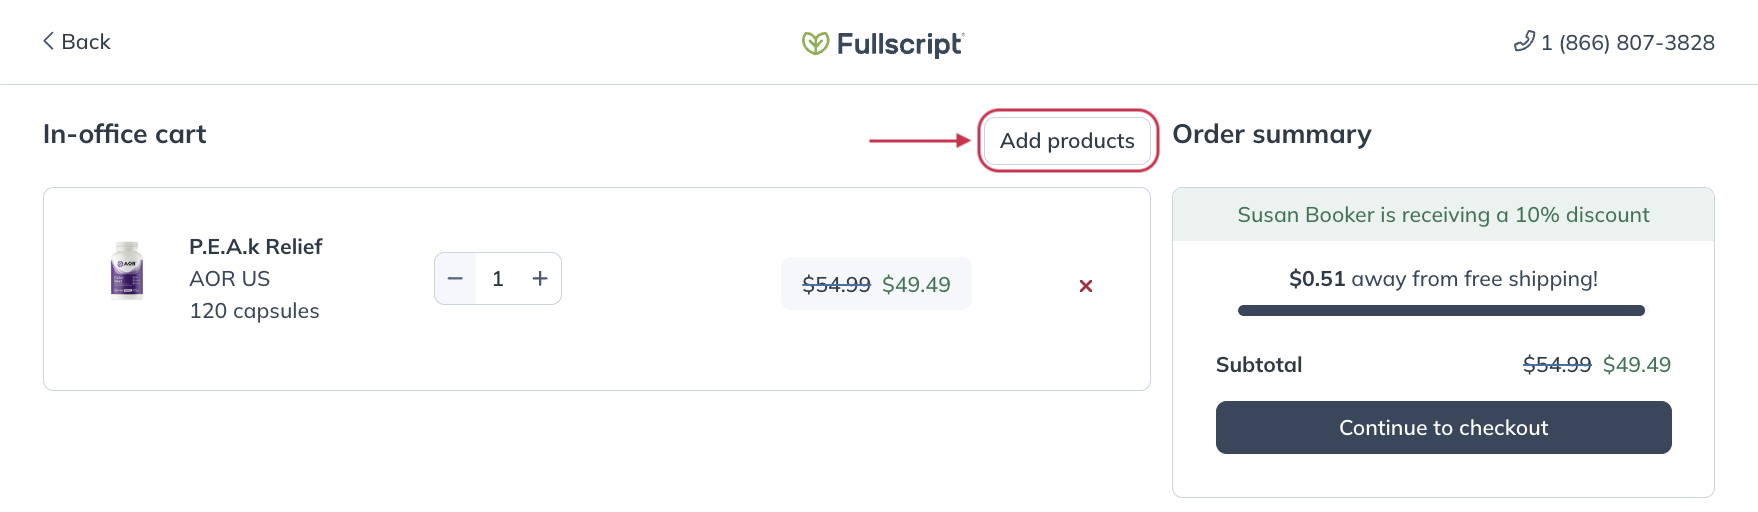 Add products button before continuing into checkout.